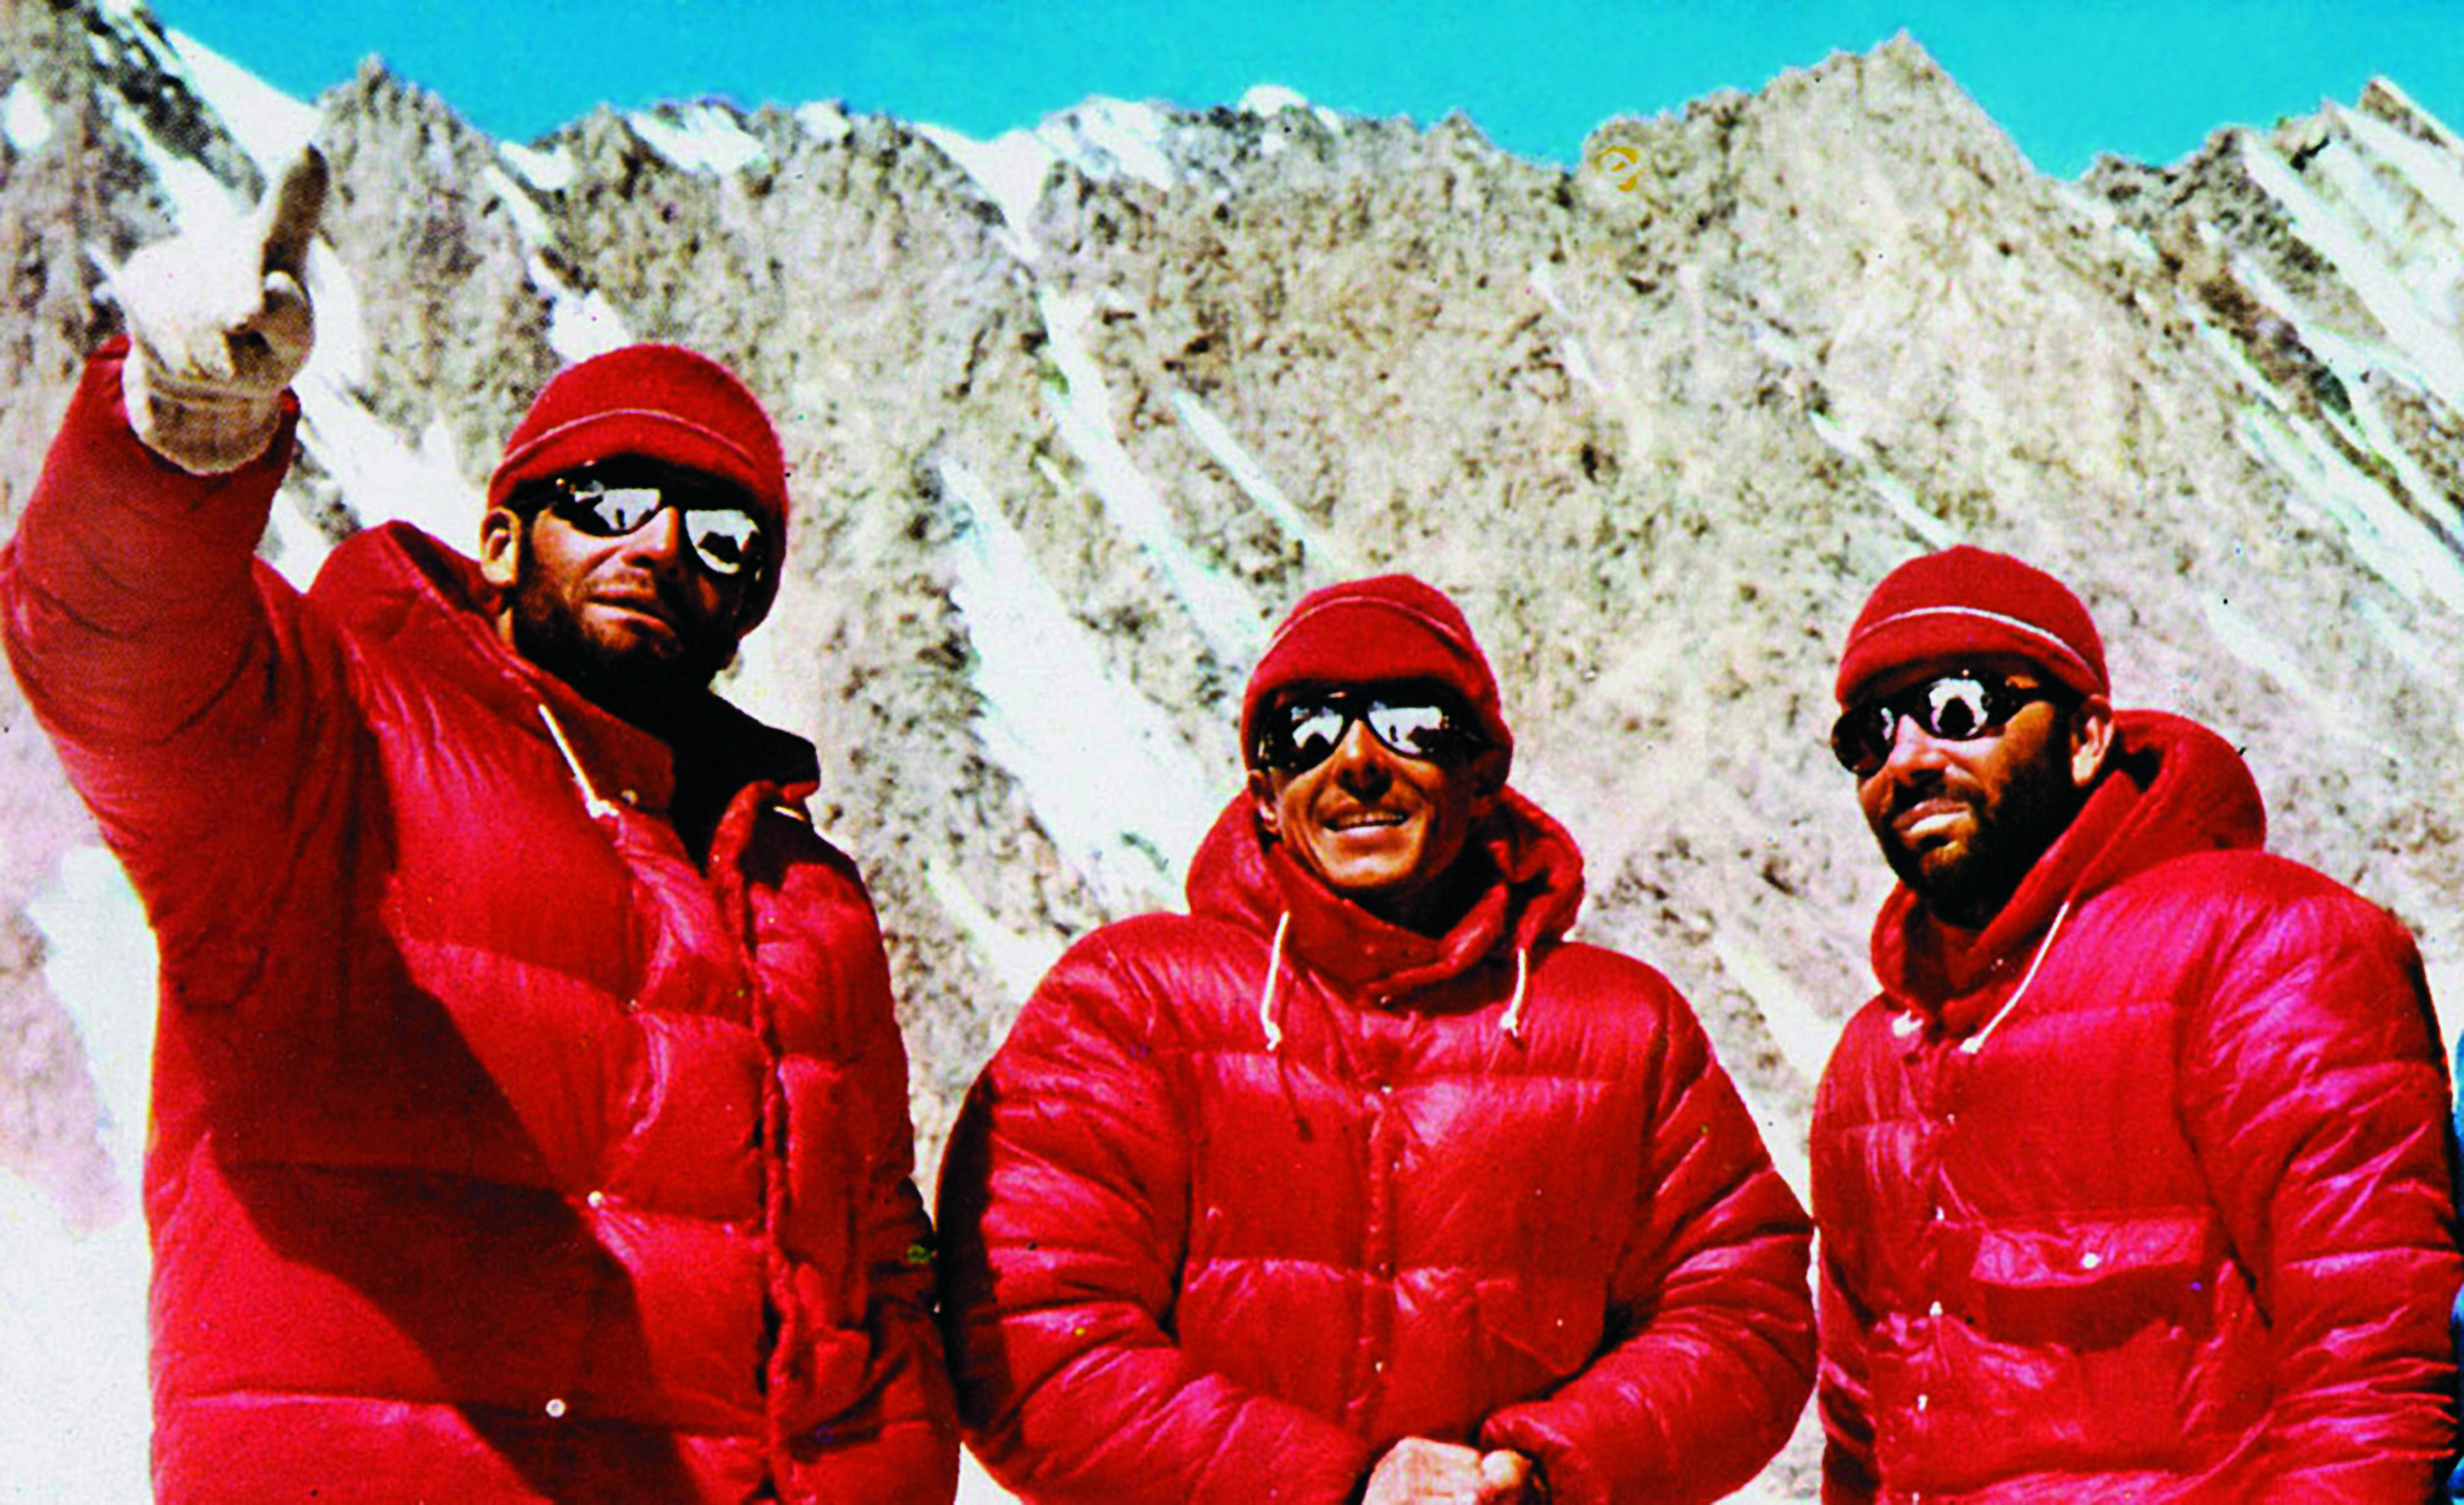 The story behind Moncler and their iconic jackets